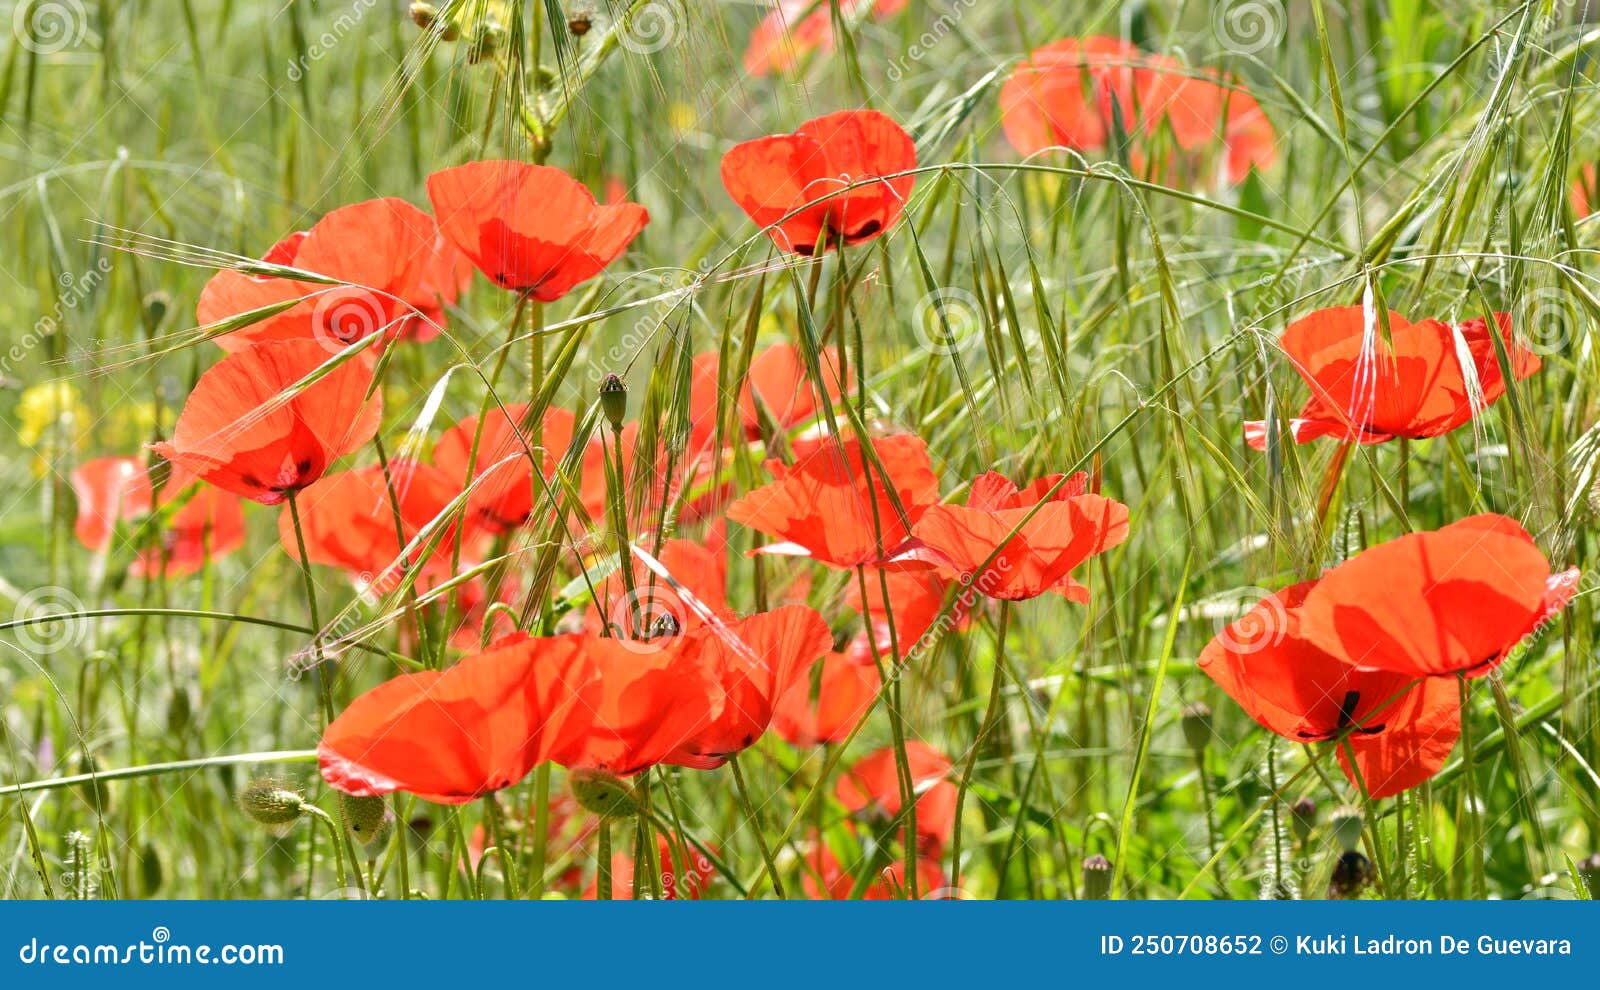 wild poppies among the grass in the field